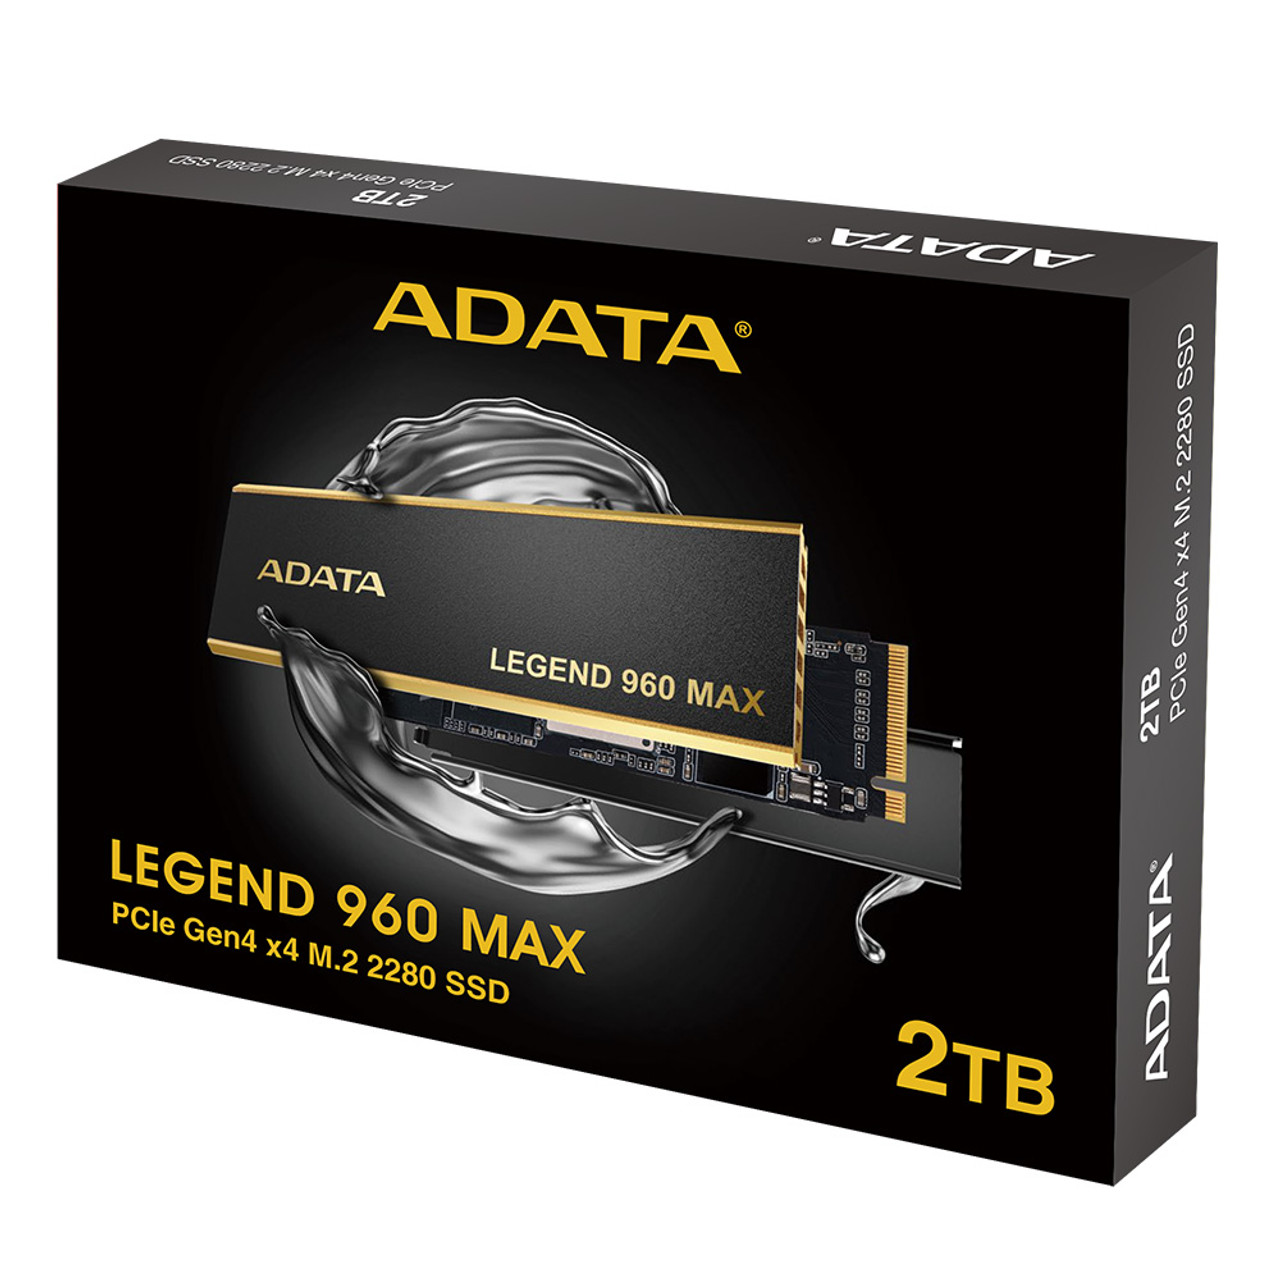 ADATA LEGEND 960 MAX 2TB M.2 2280 PCIe Gen4x4 Internal Solid State Drive |  1560TBW - SMI SM2264 3D NAND | Up to 7400 MBps - Black PS5 SSD 2 Terabyte |  ...